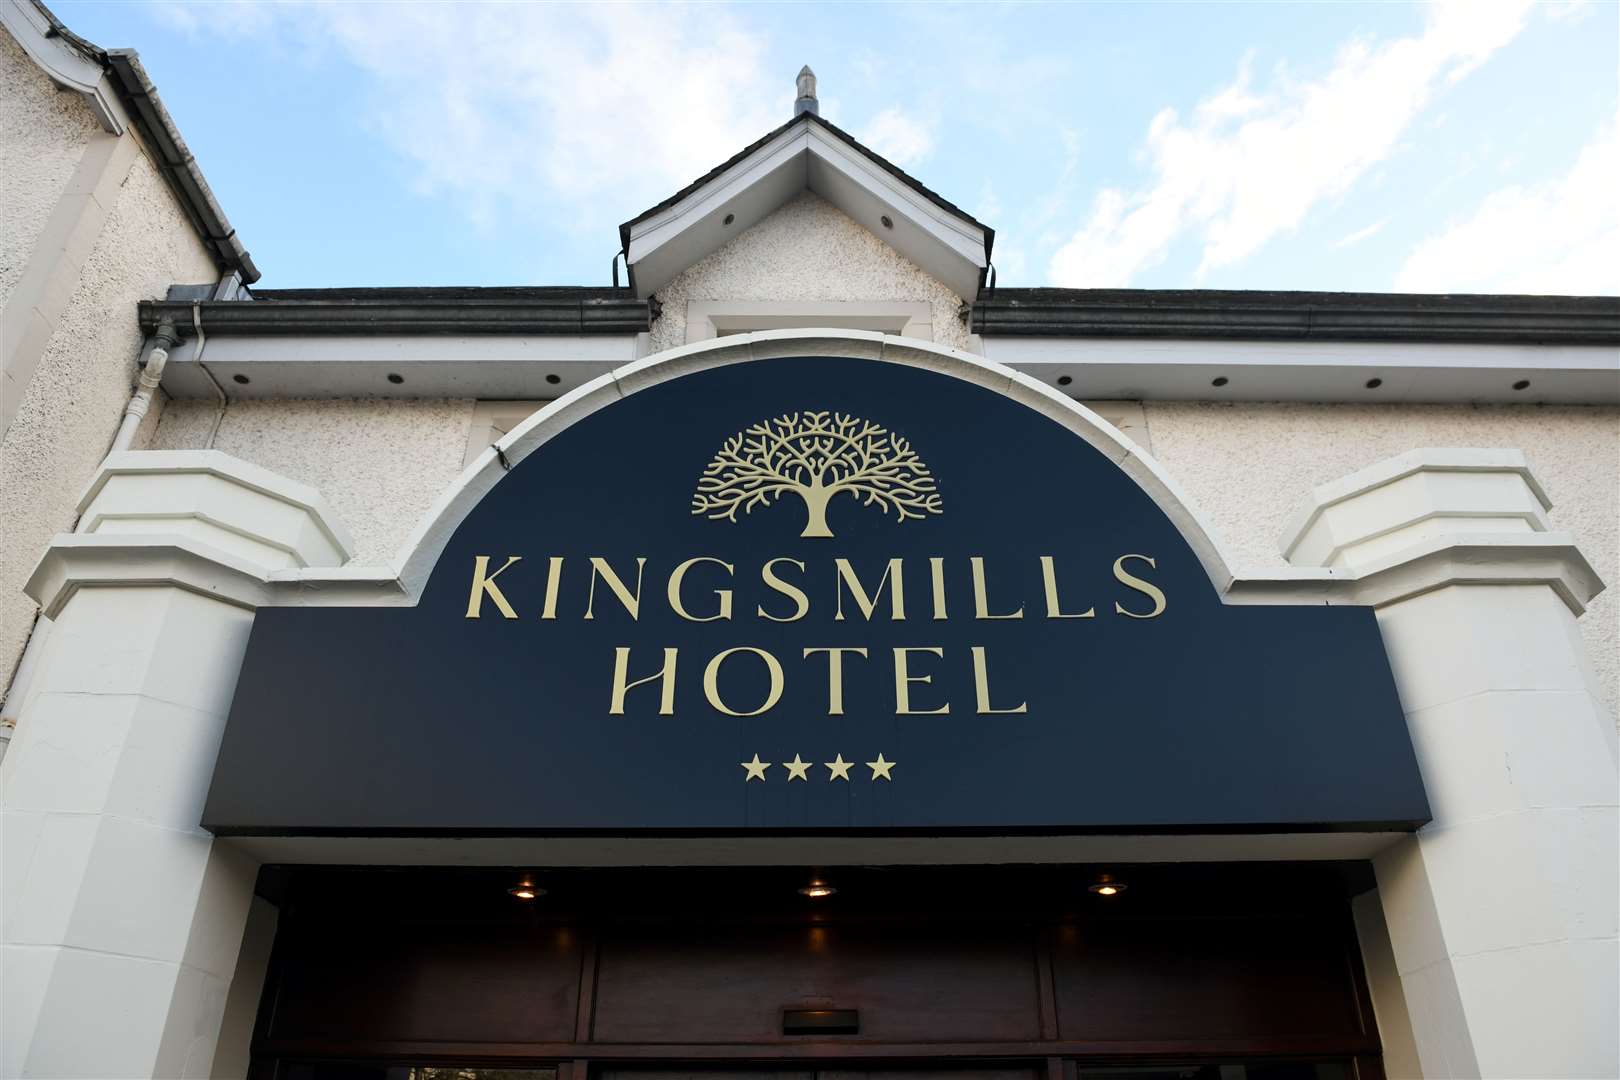 The Kingsmills Hotel is paying an extra £1 million per year than it was previously. Picture: James Mackenzie